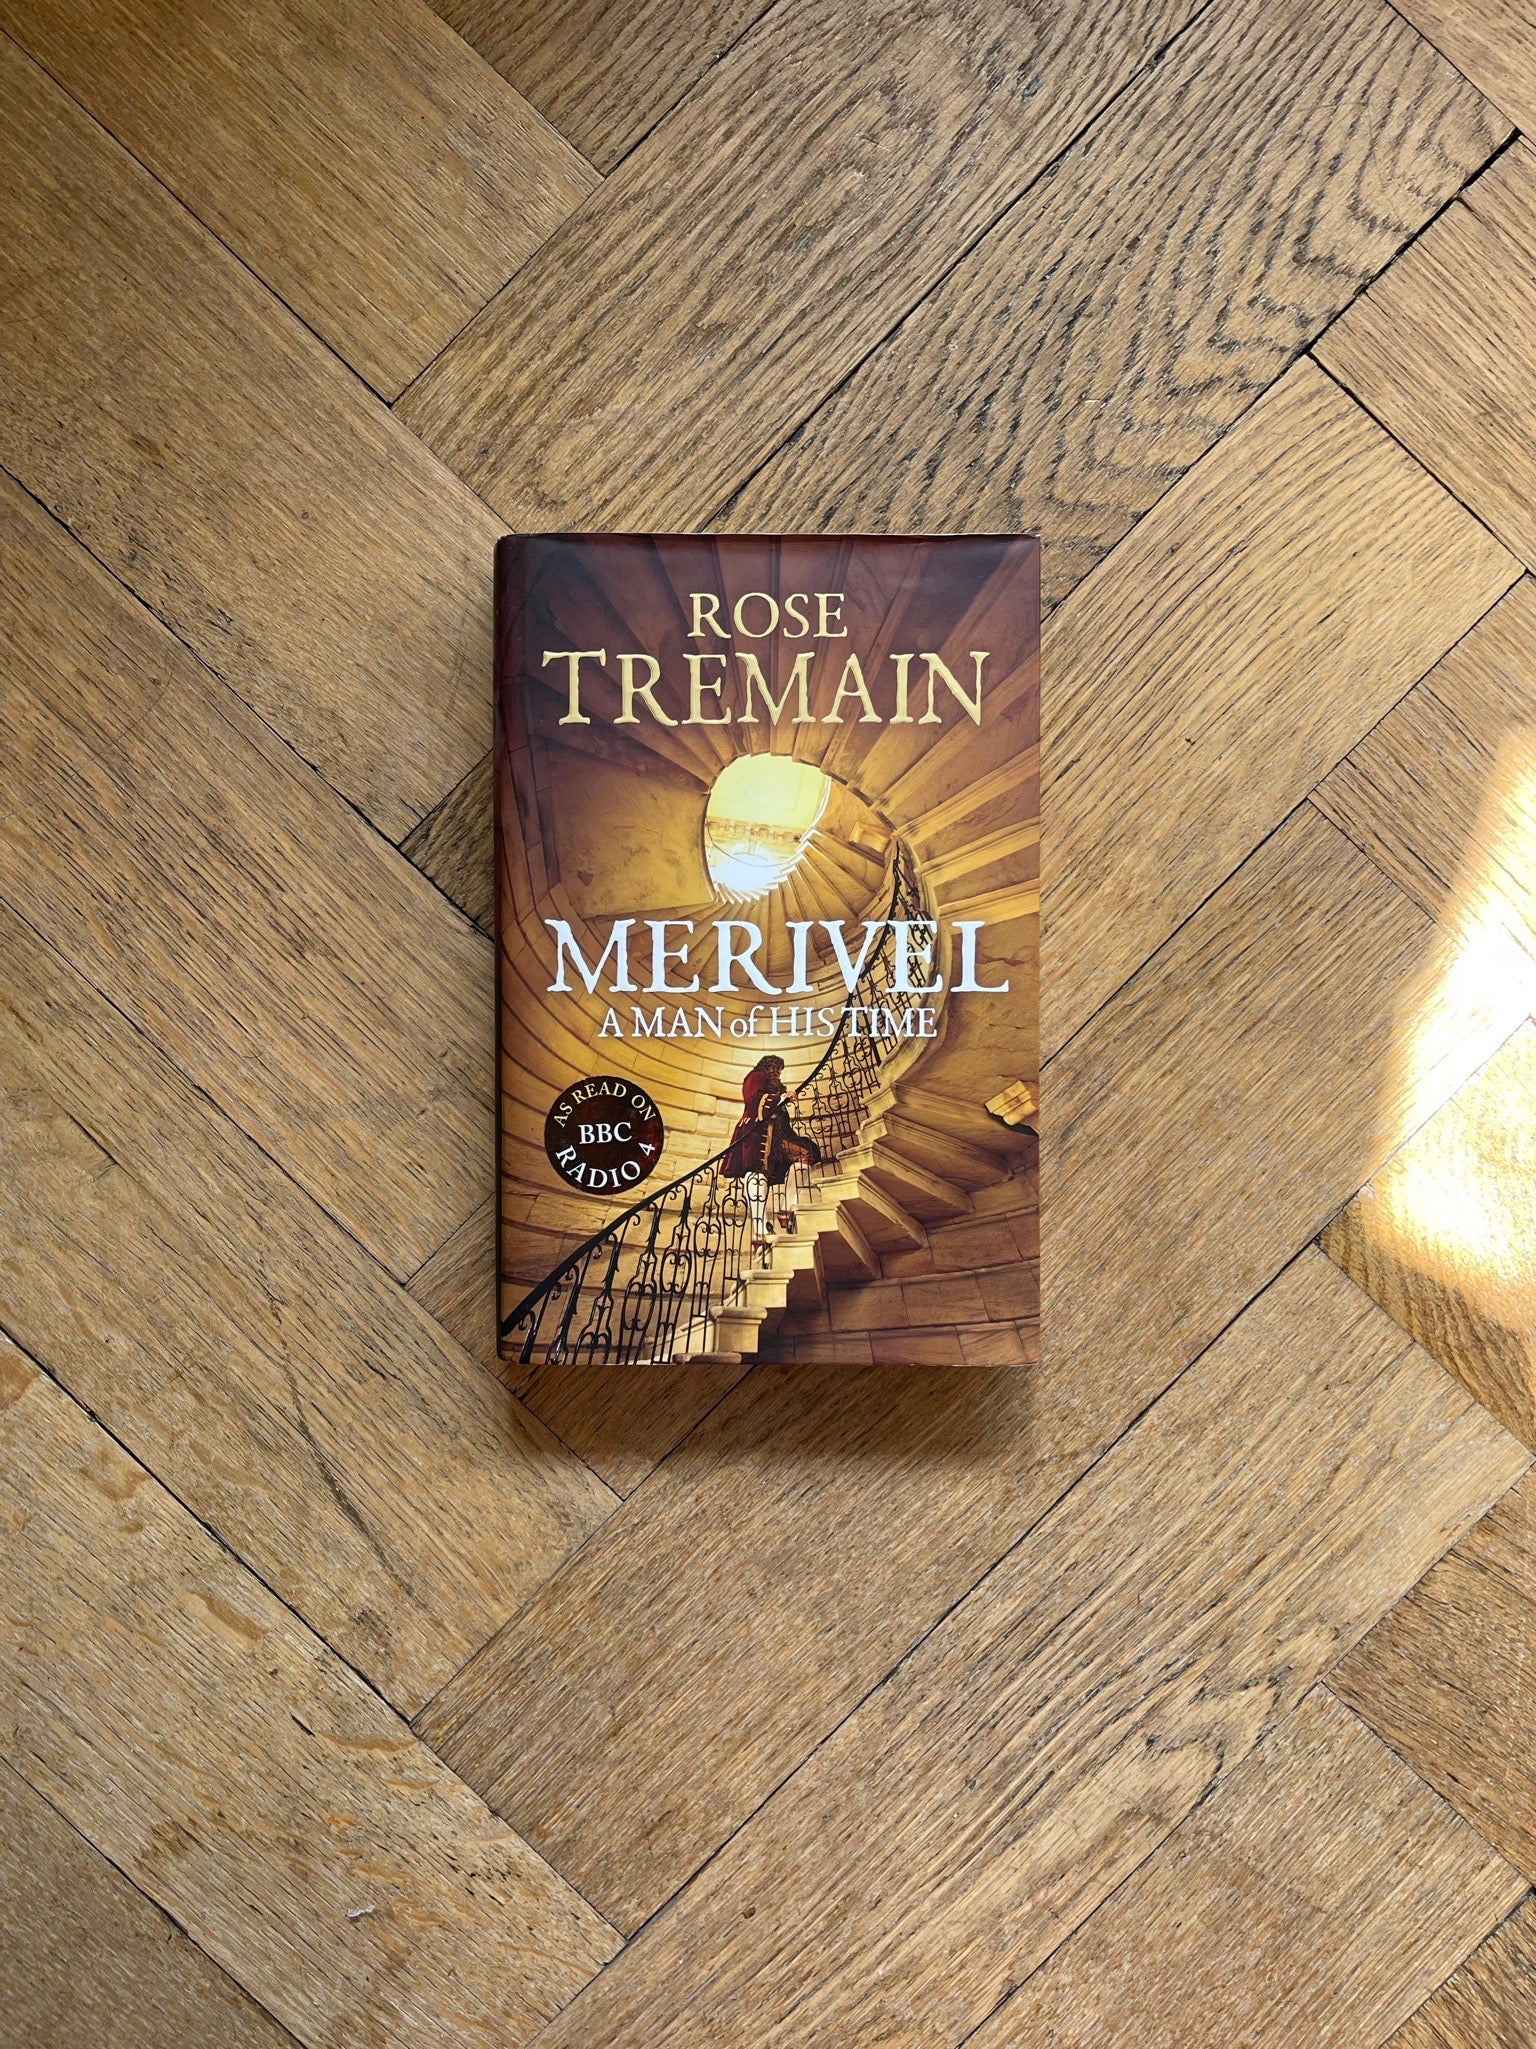 Merivel a Man of his Time by Rose Tremain